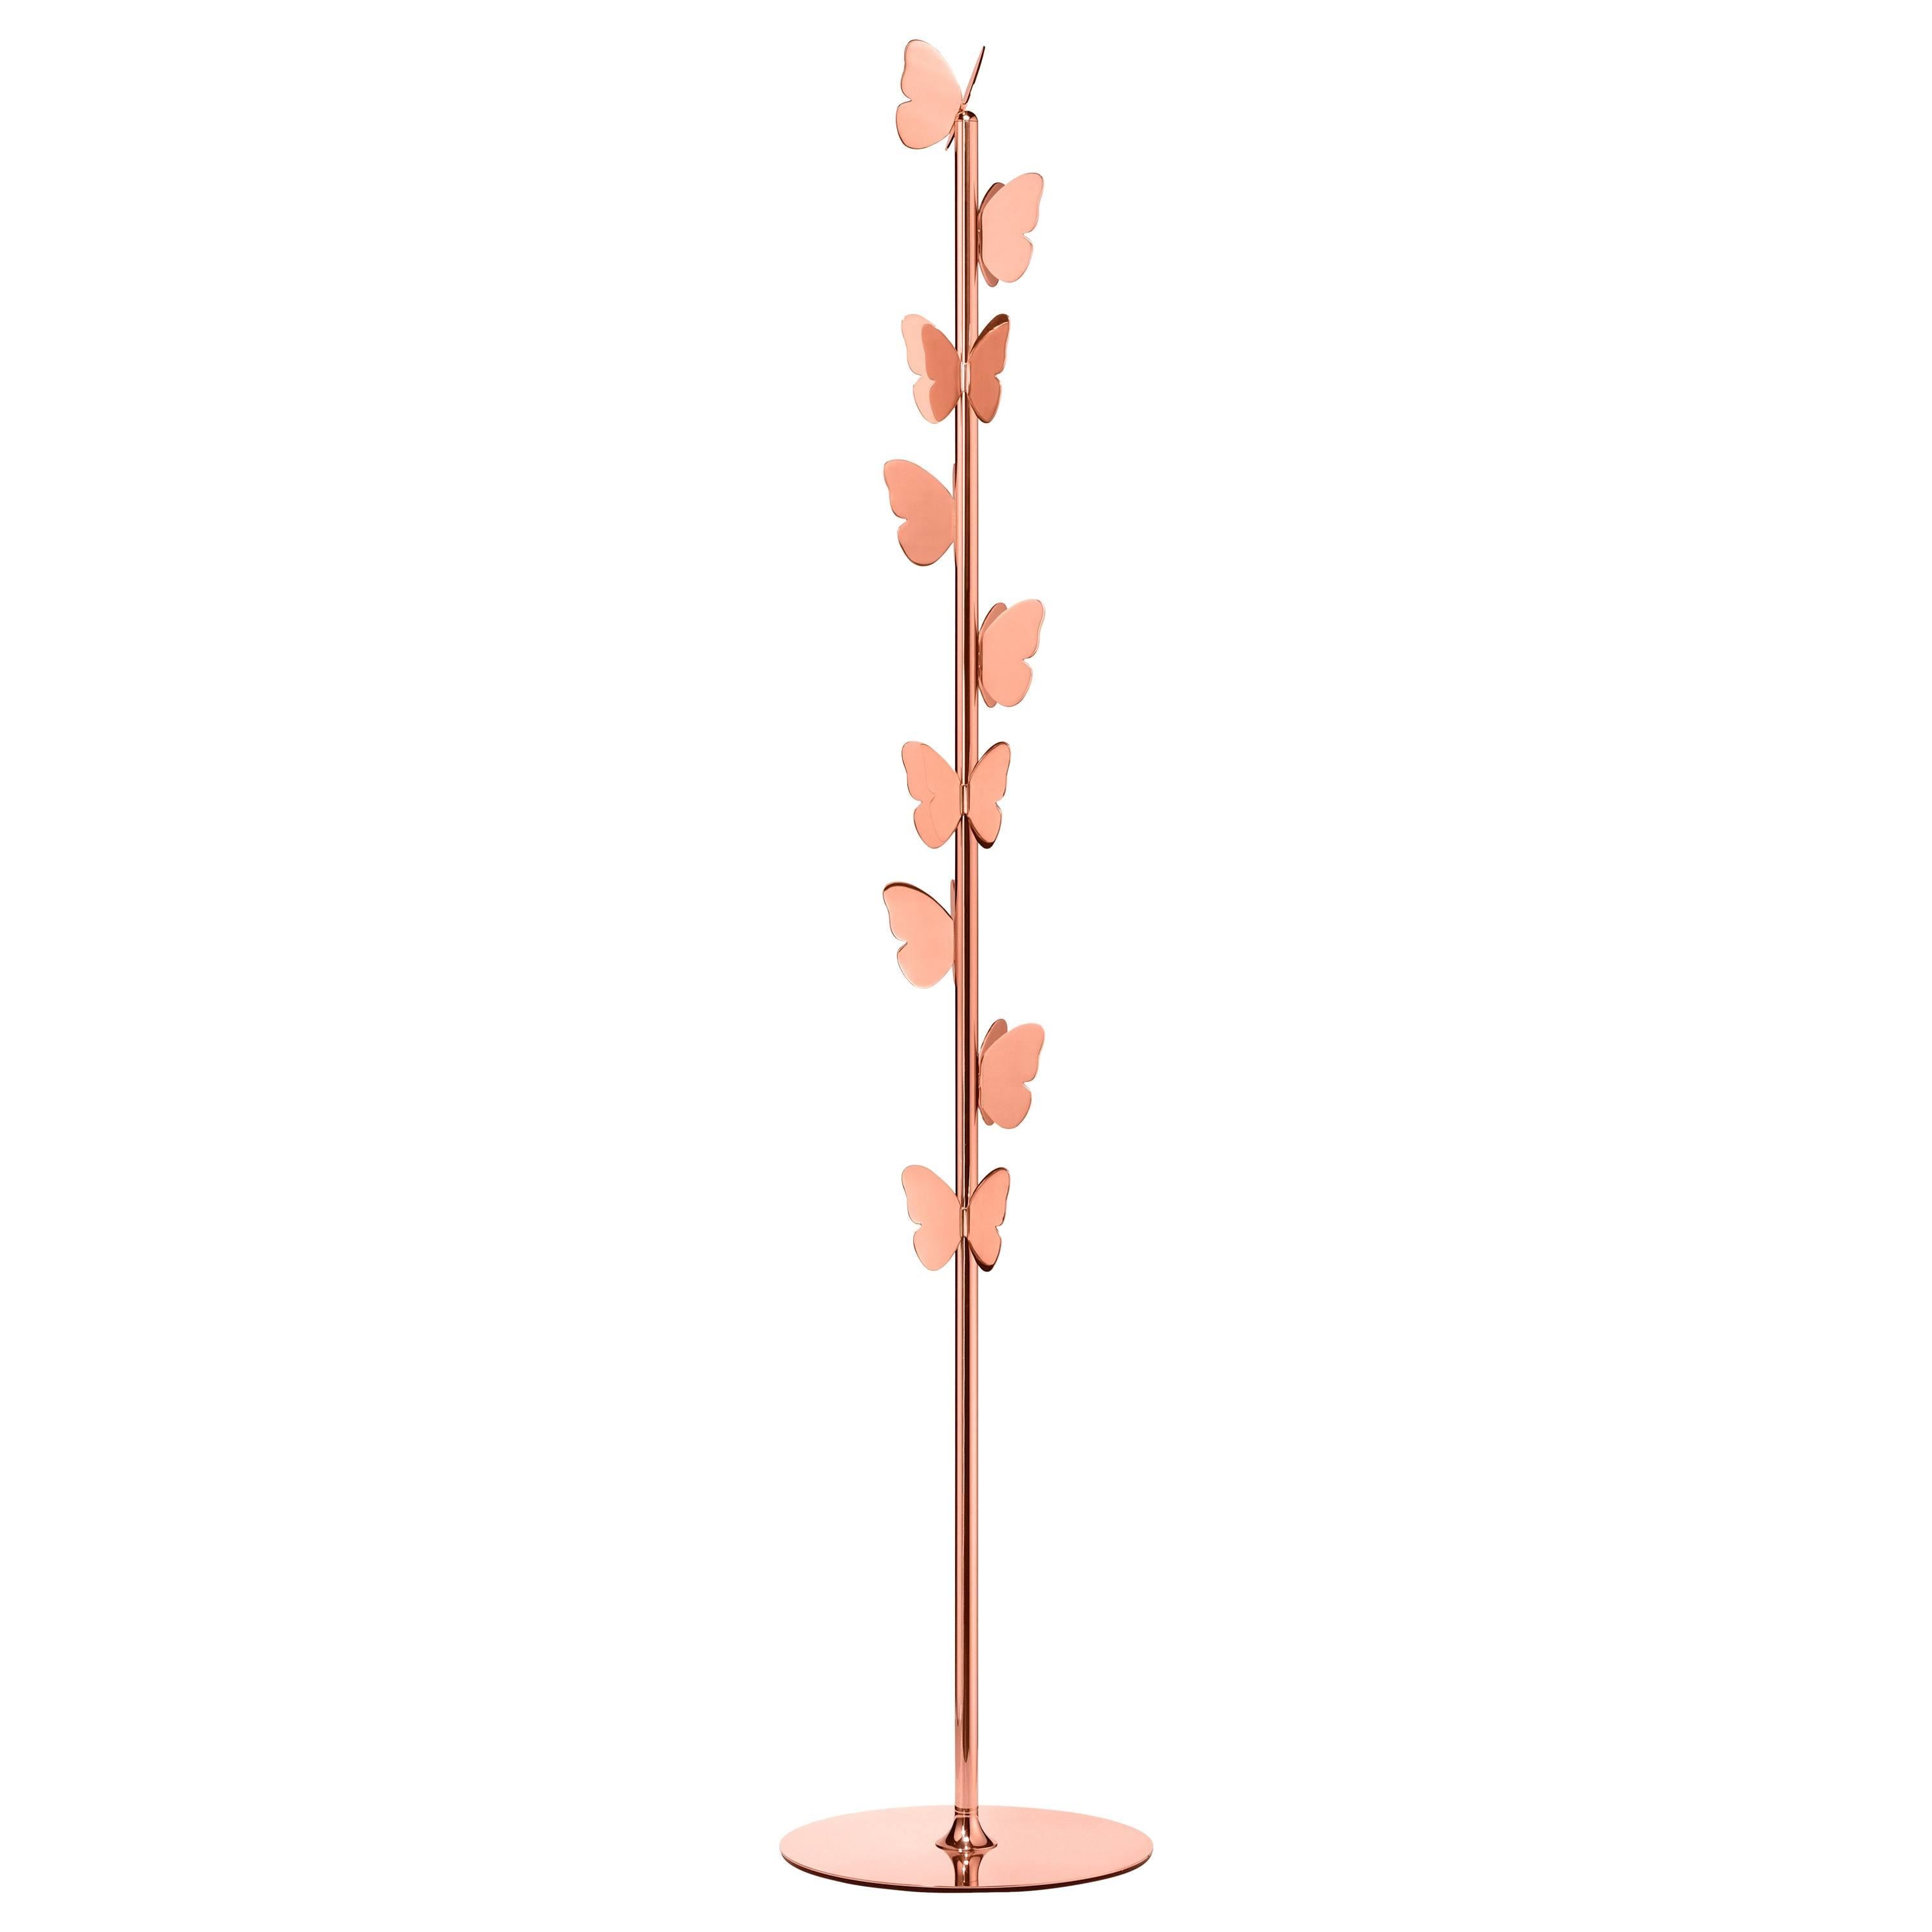 Ghidini 1961 Butterfly Coat Rack in Rose Gold Finish For Sale